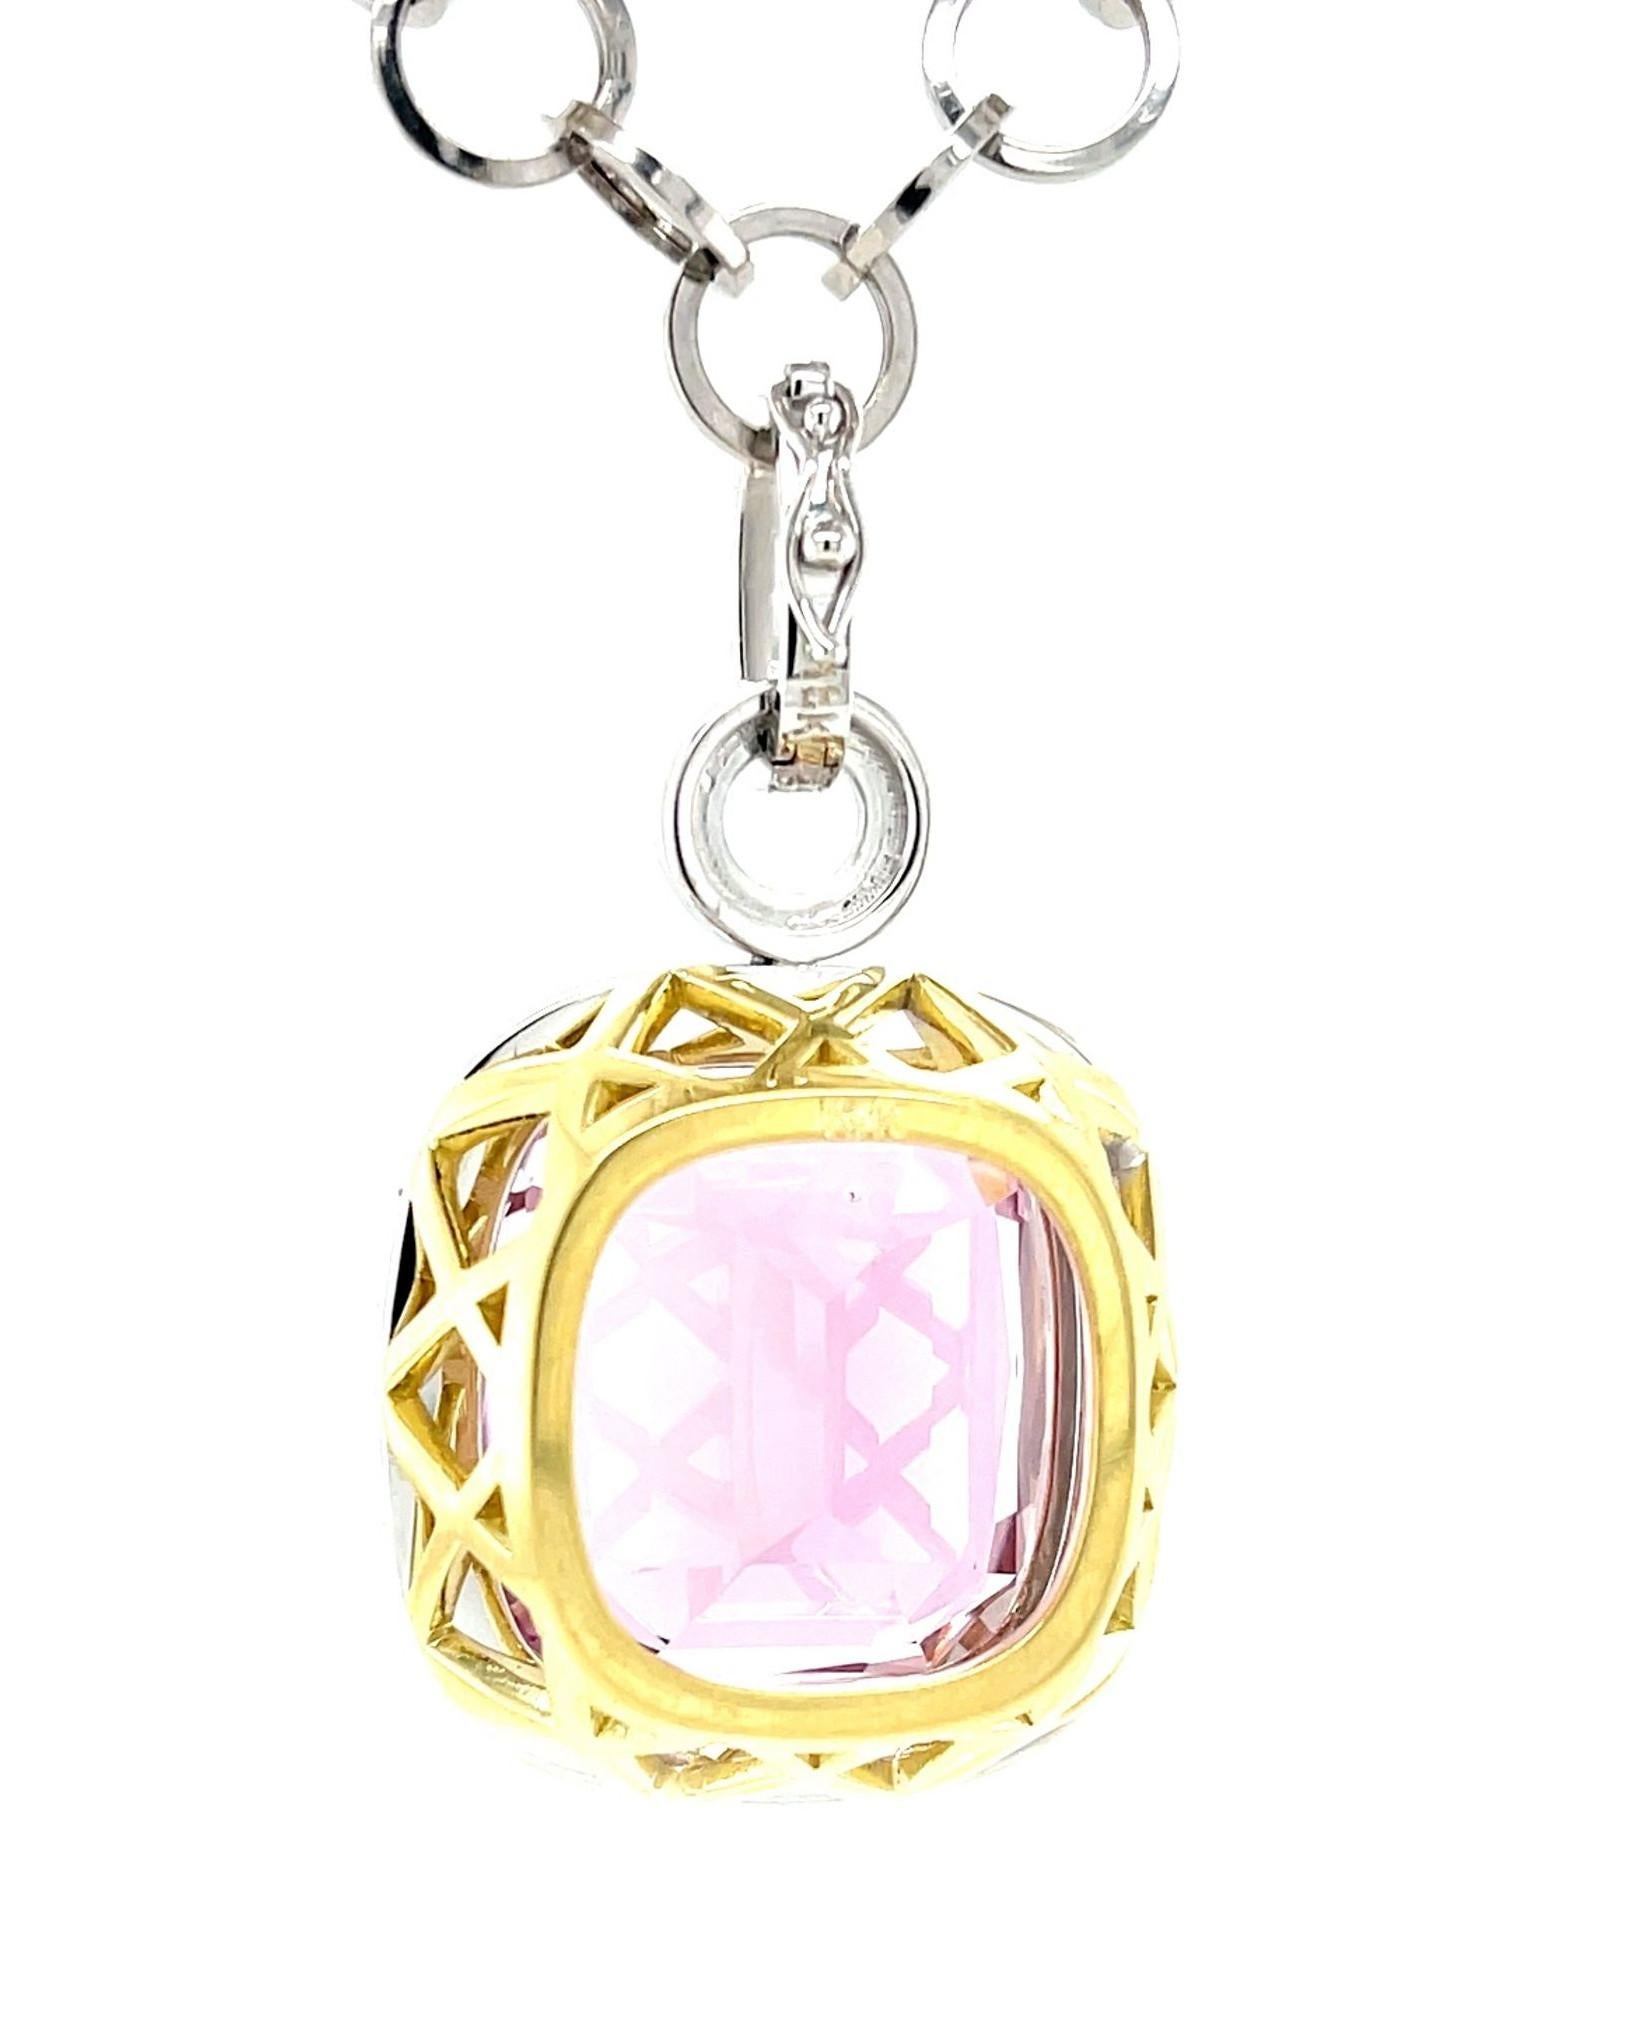 61.26 Carat Kunzite and Diamond Pendant Enhancer in 18k White and Yellow Gold For Sale 2